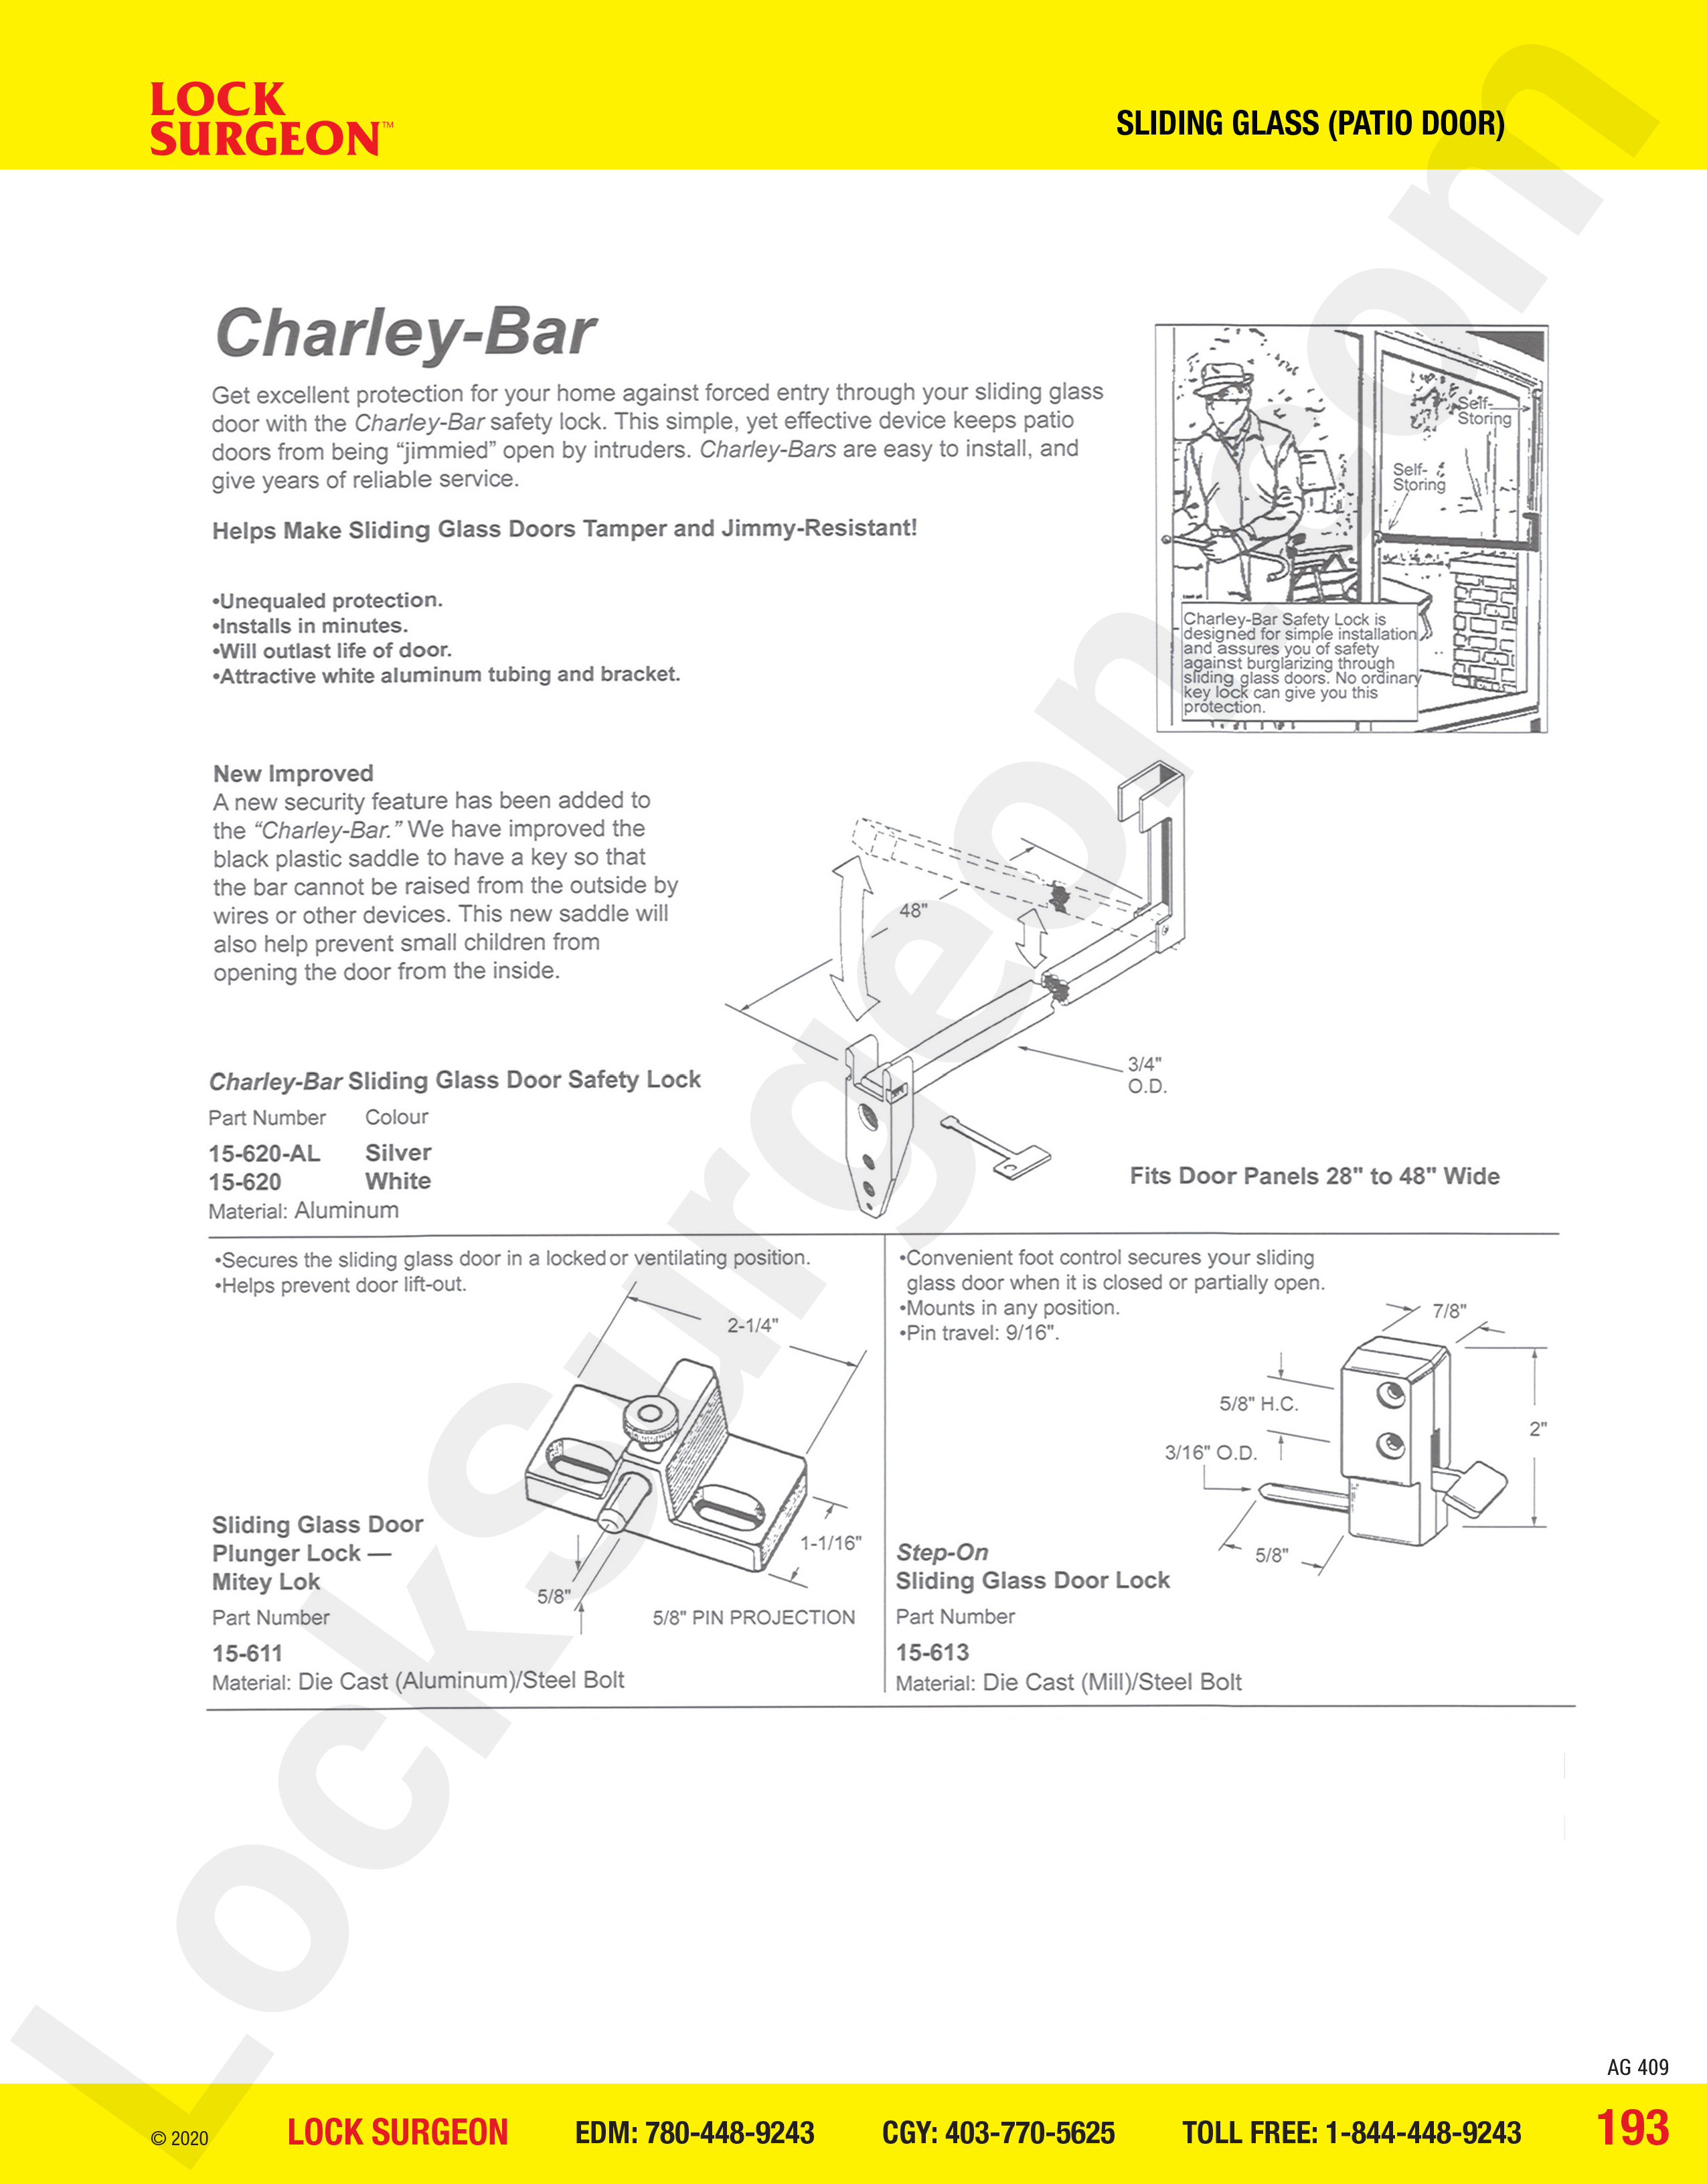 Sliding Glass Patio Door charley-bar safety lock for unequaled protection will outlast life of door.